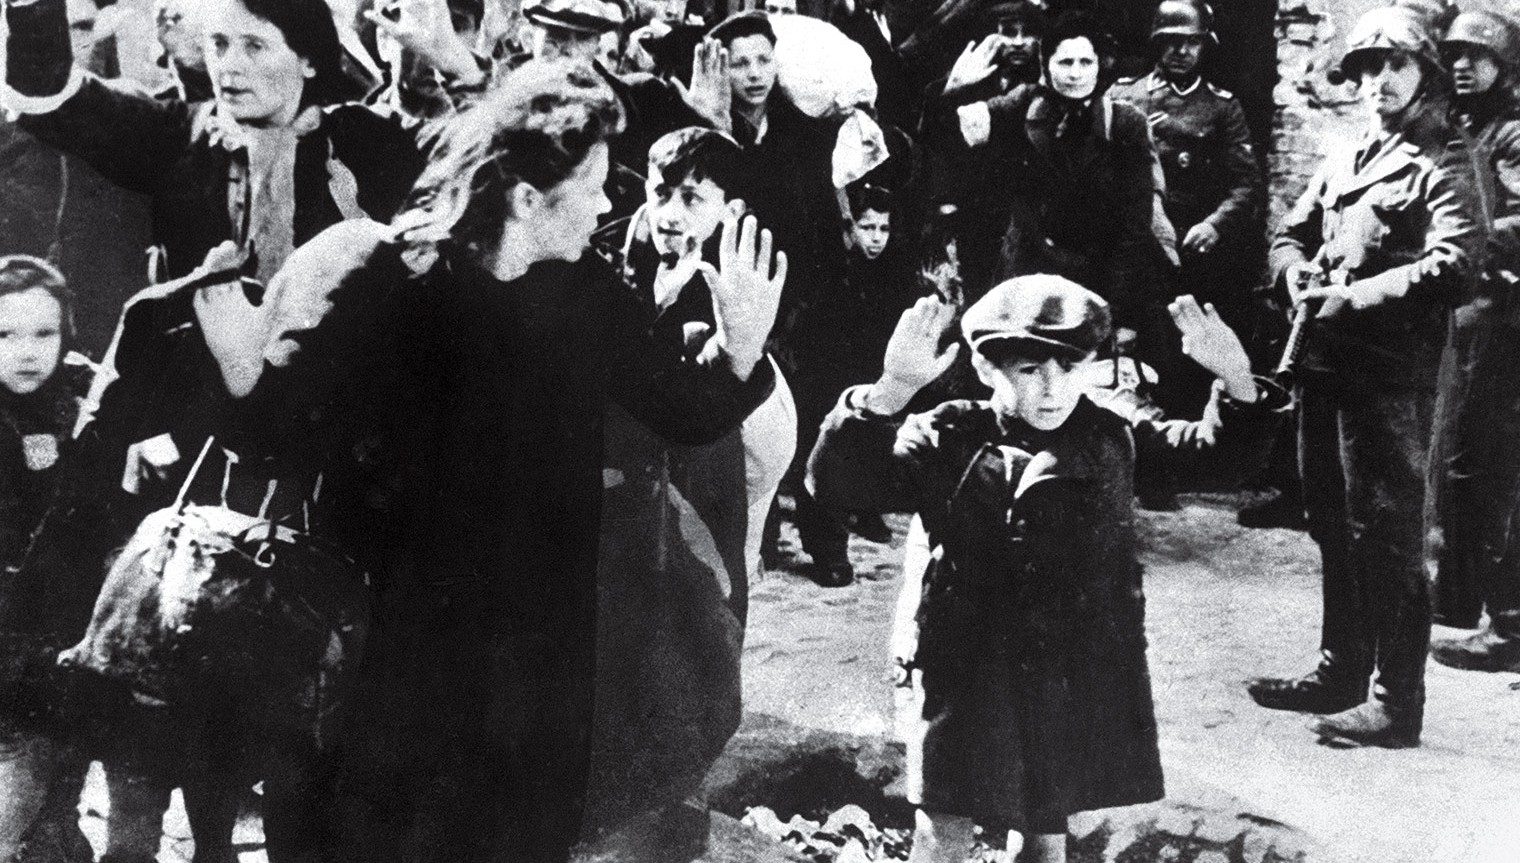 Warsaw commemorates the 76th anniversary of the outbreak of the Warsaw Ghetto Uprising